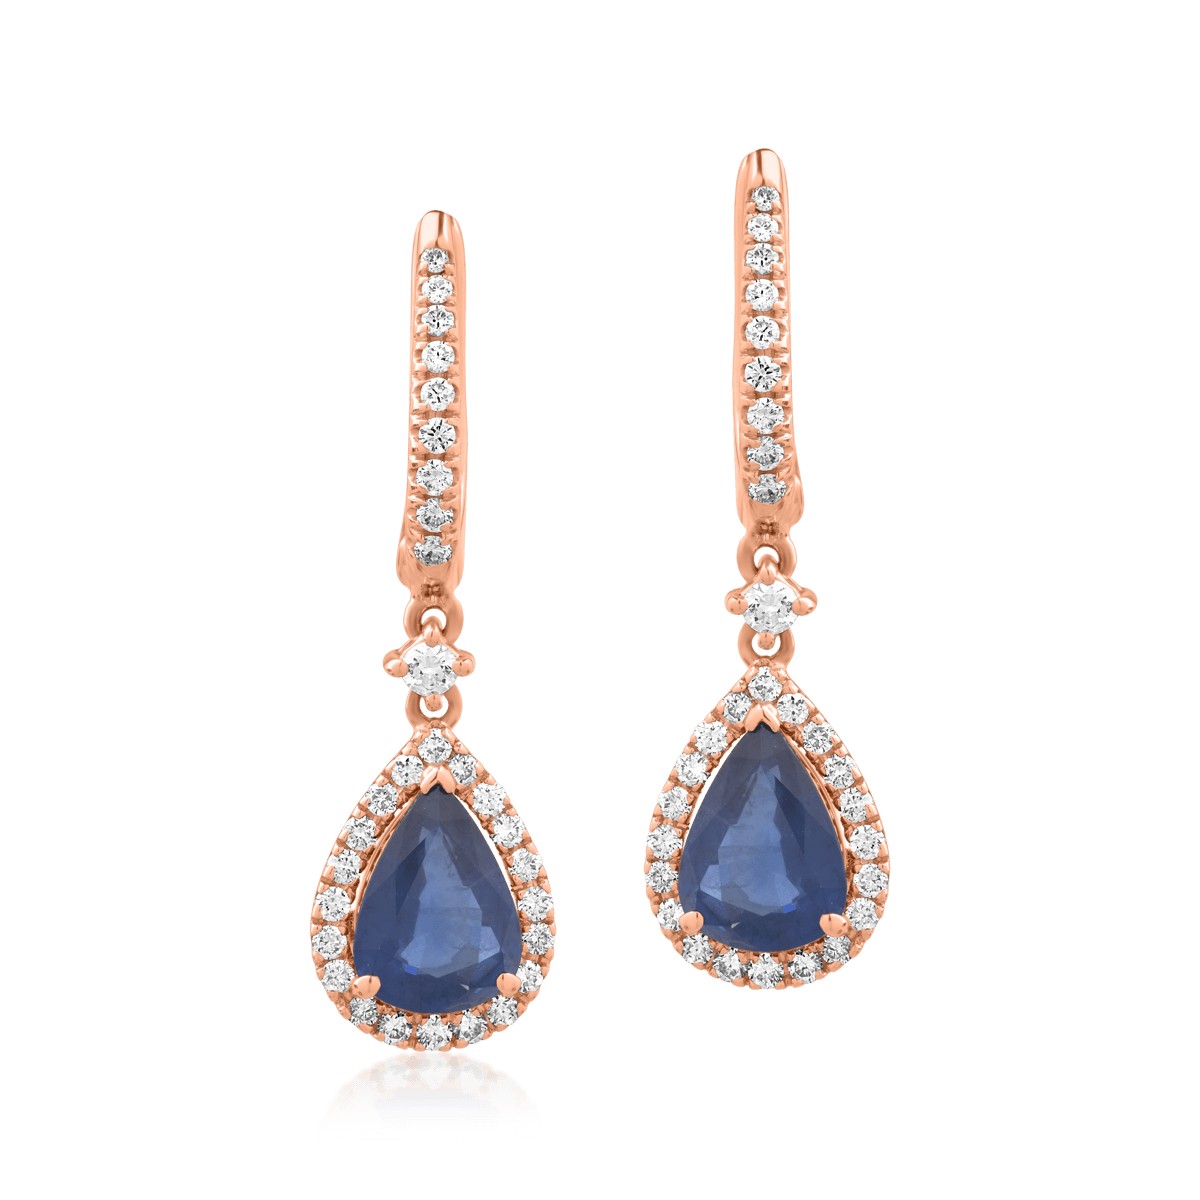 18K rose gold earrings with 2.13ct sapphires and 0.46ct diamonds